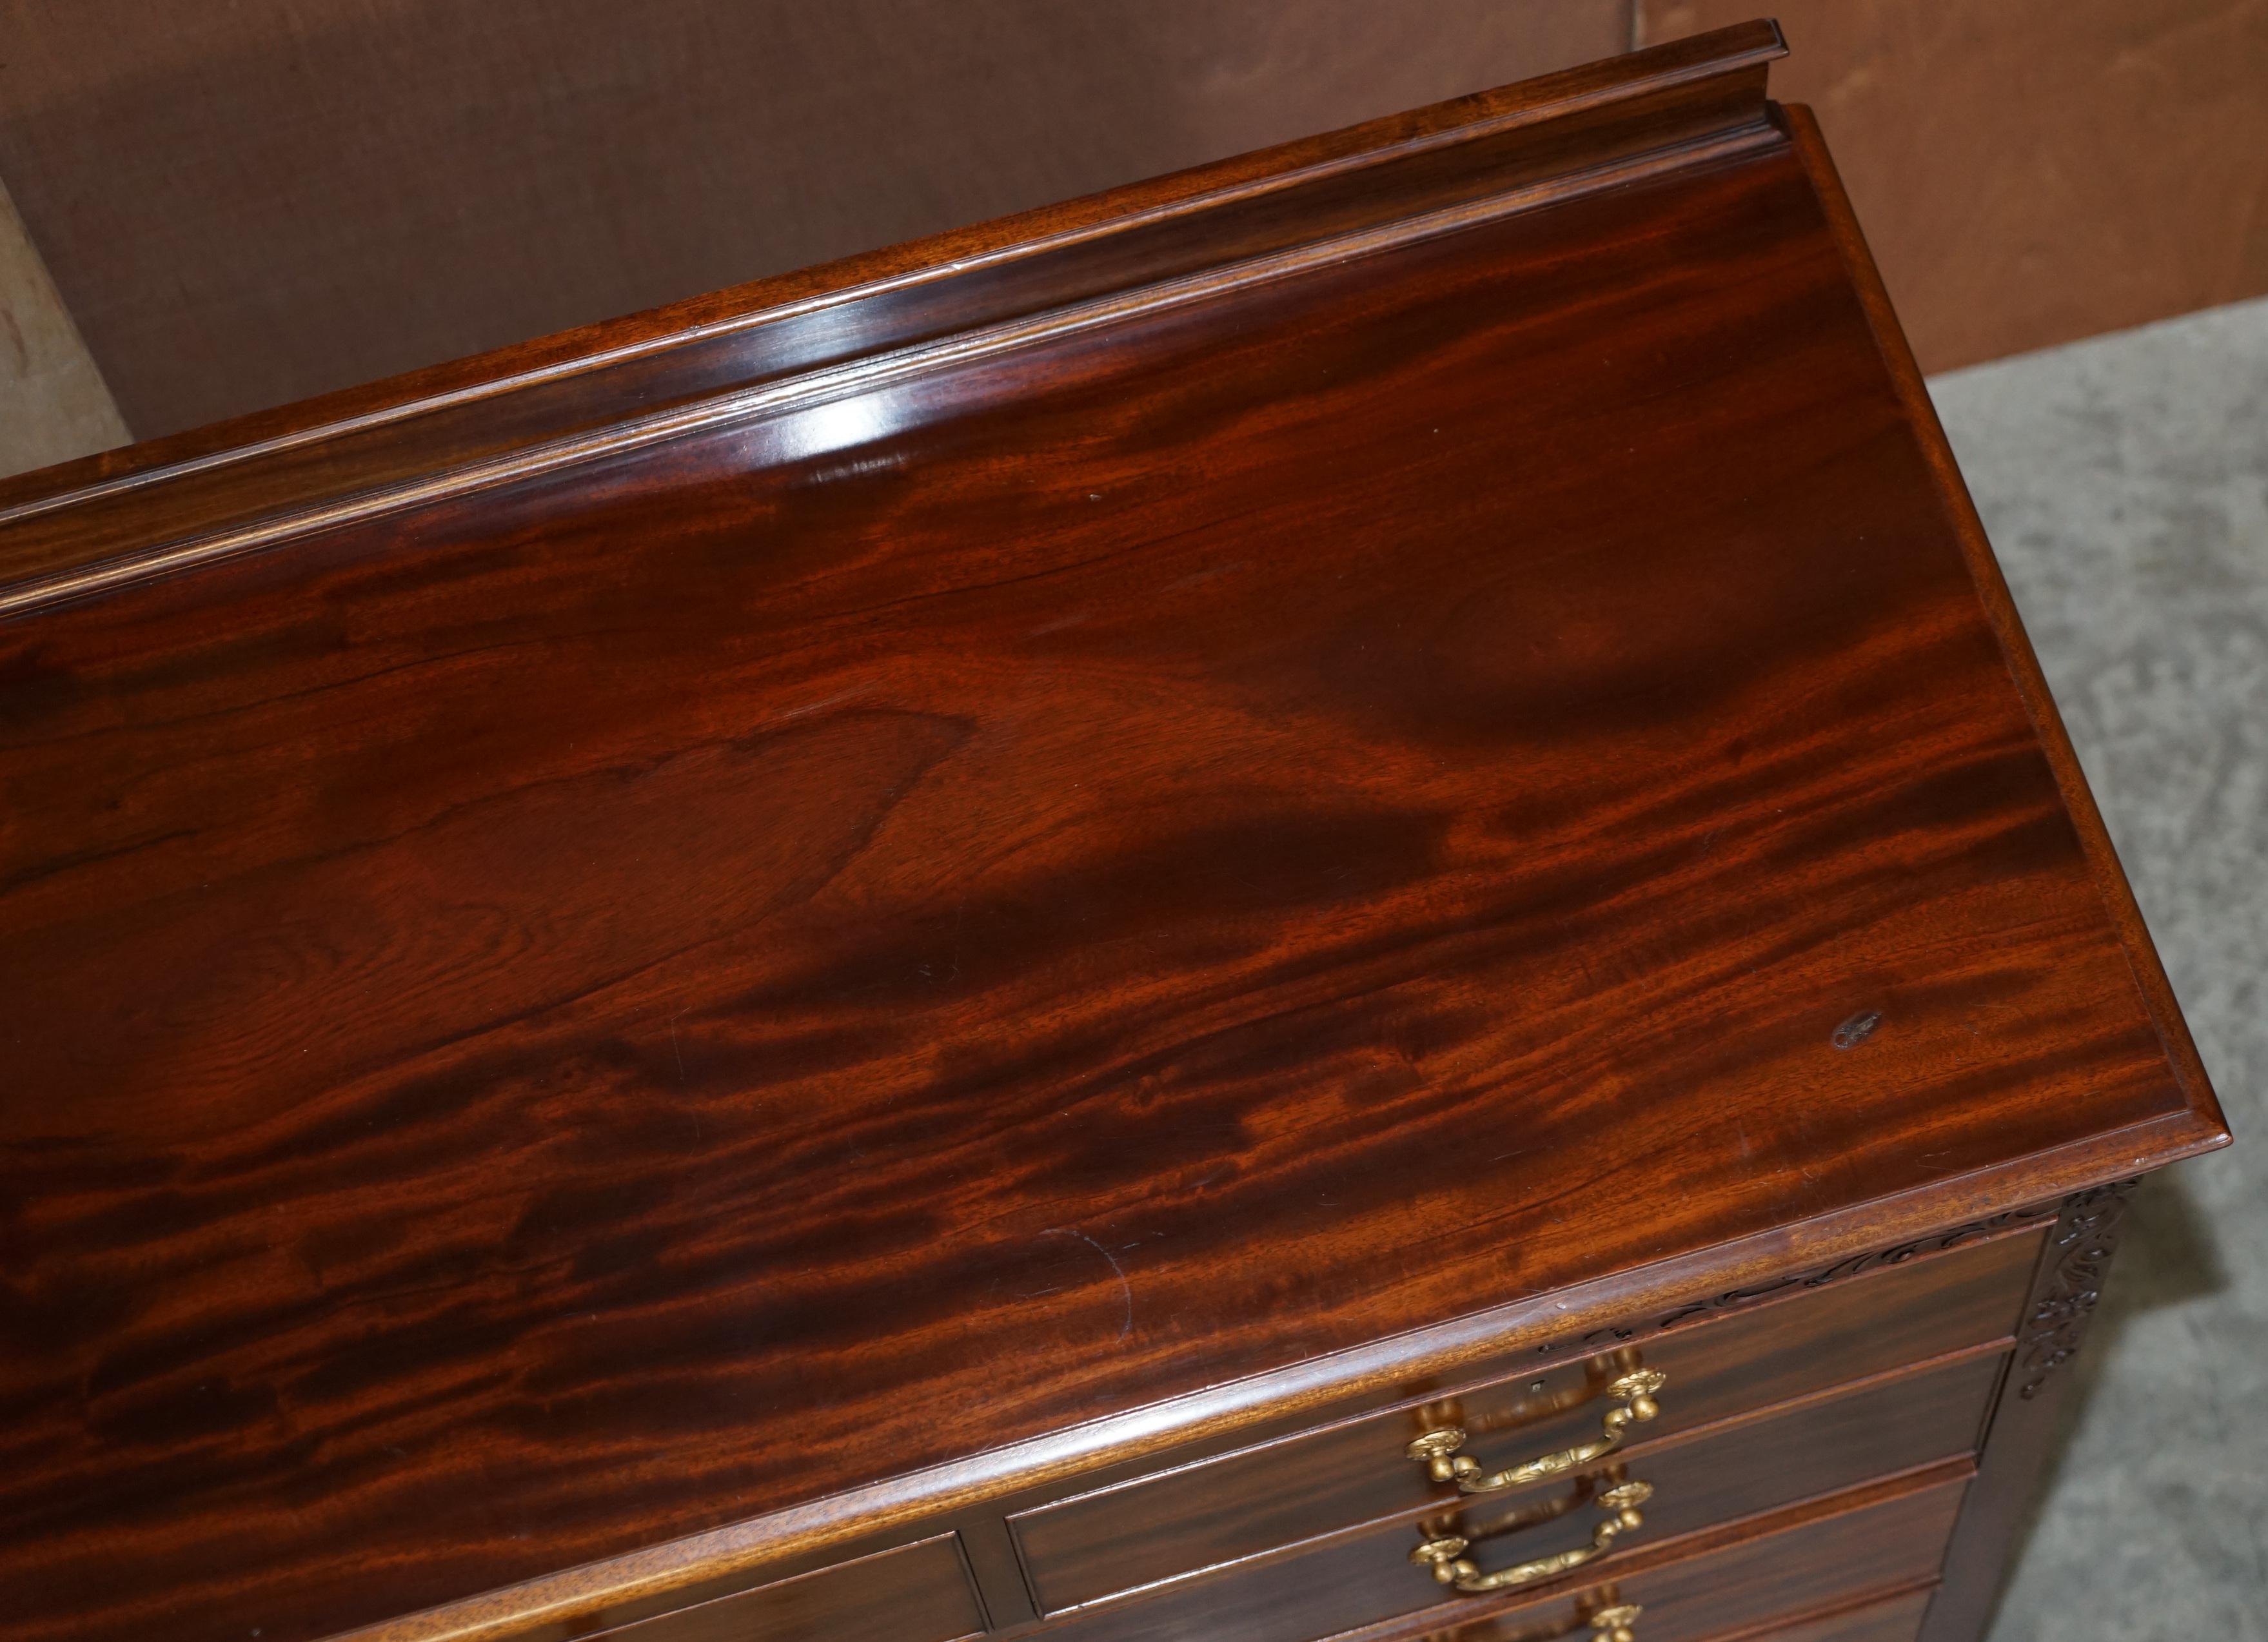 Hand-Crafted Exquisite Quality circa 1900 Honduras Hardwood Chest of Drawers Part of a Suite